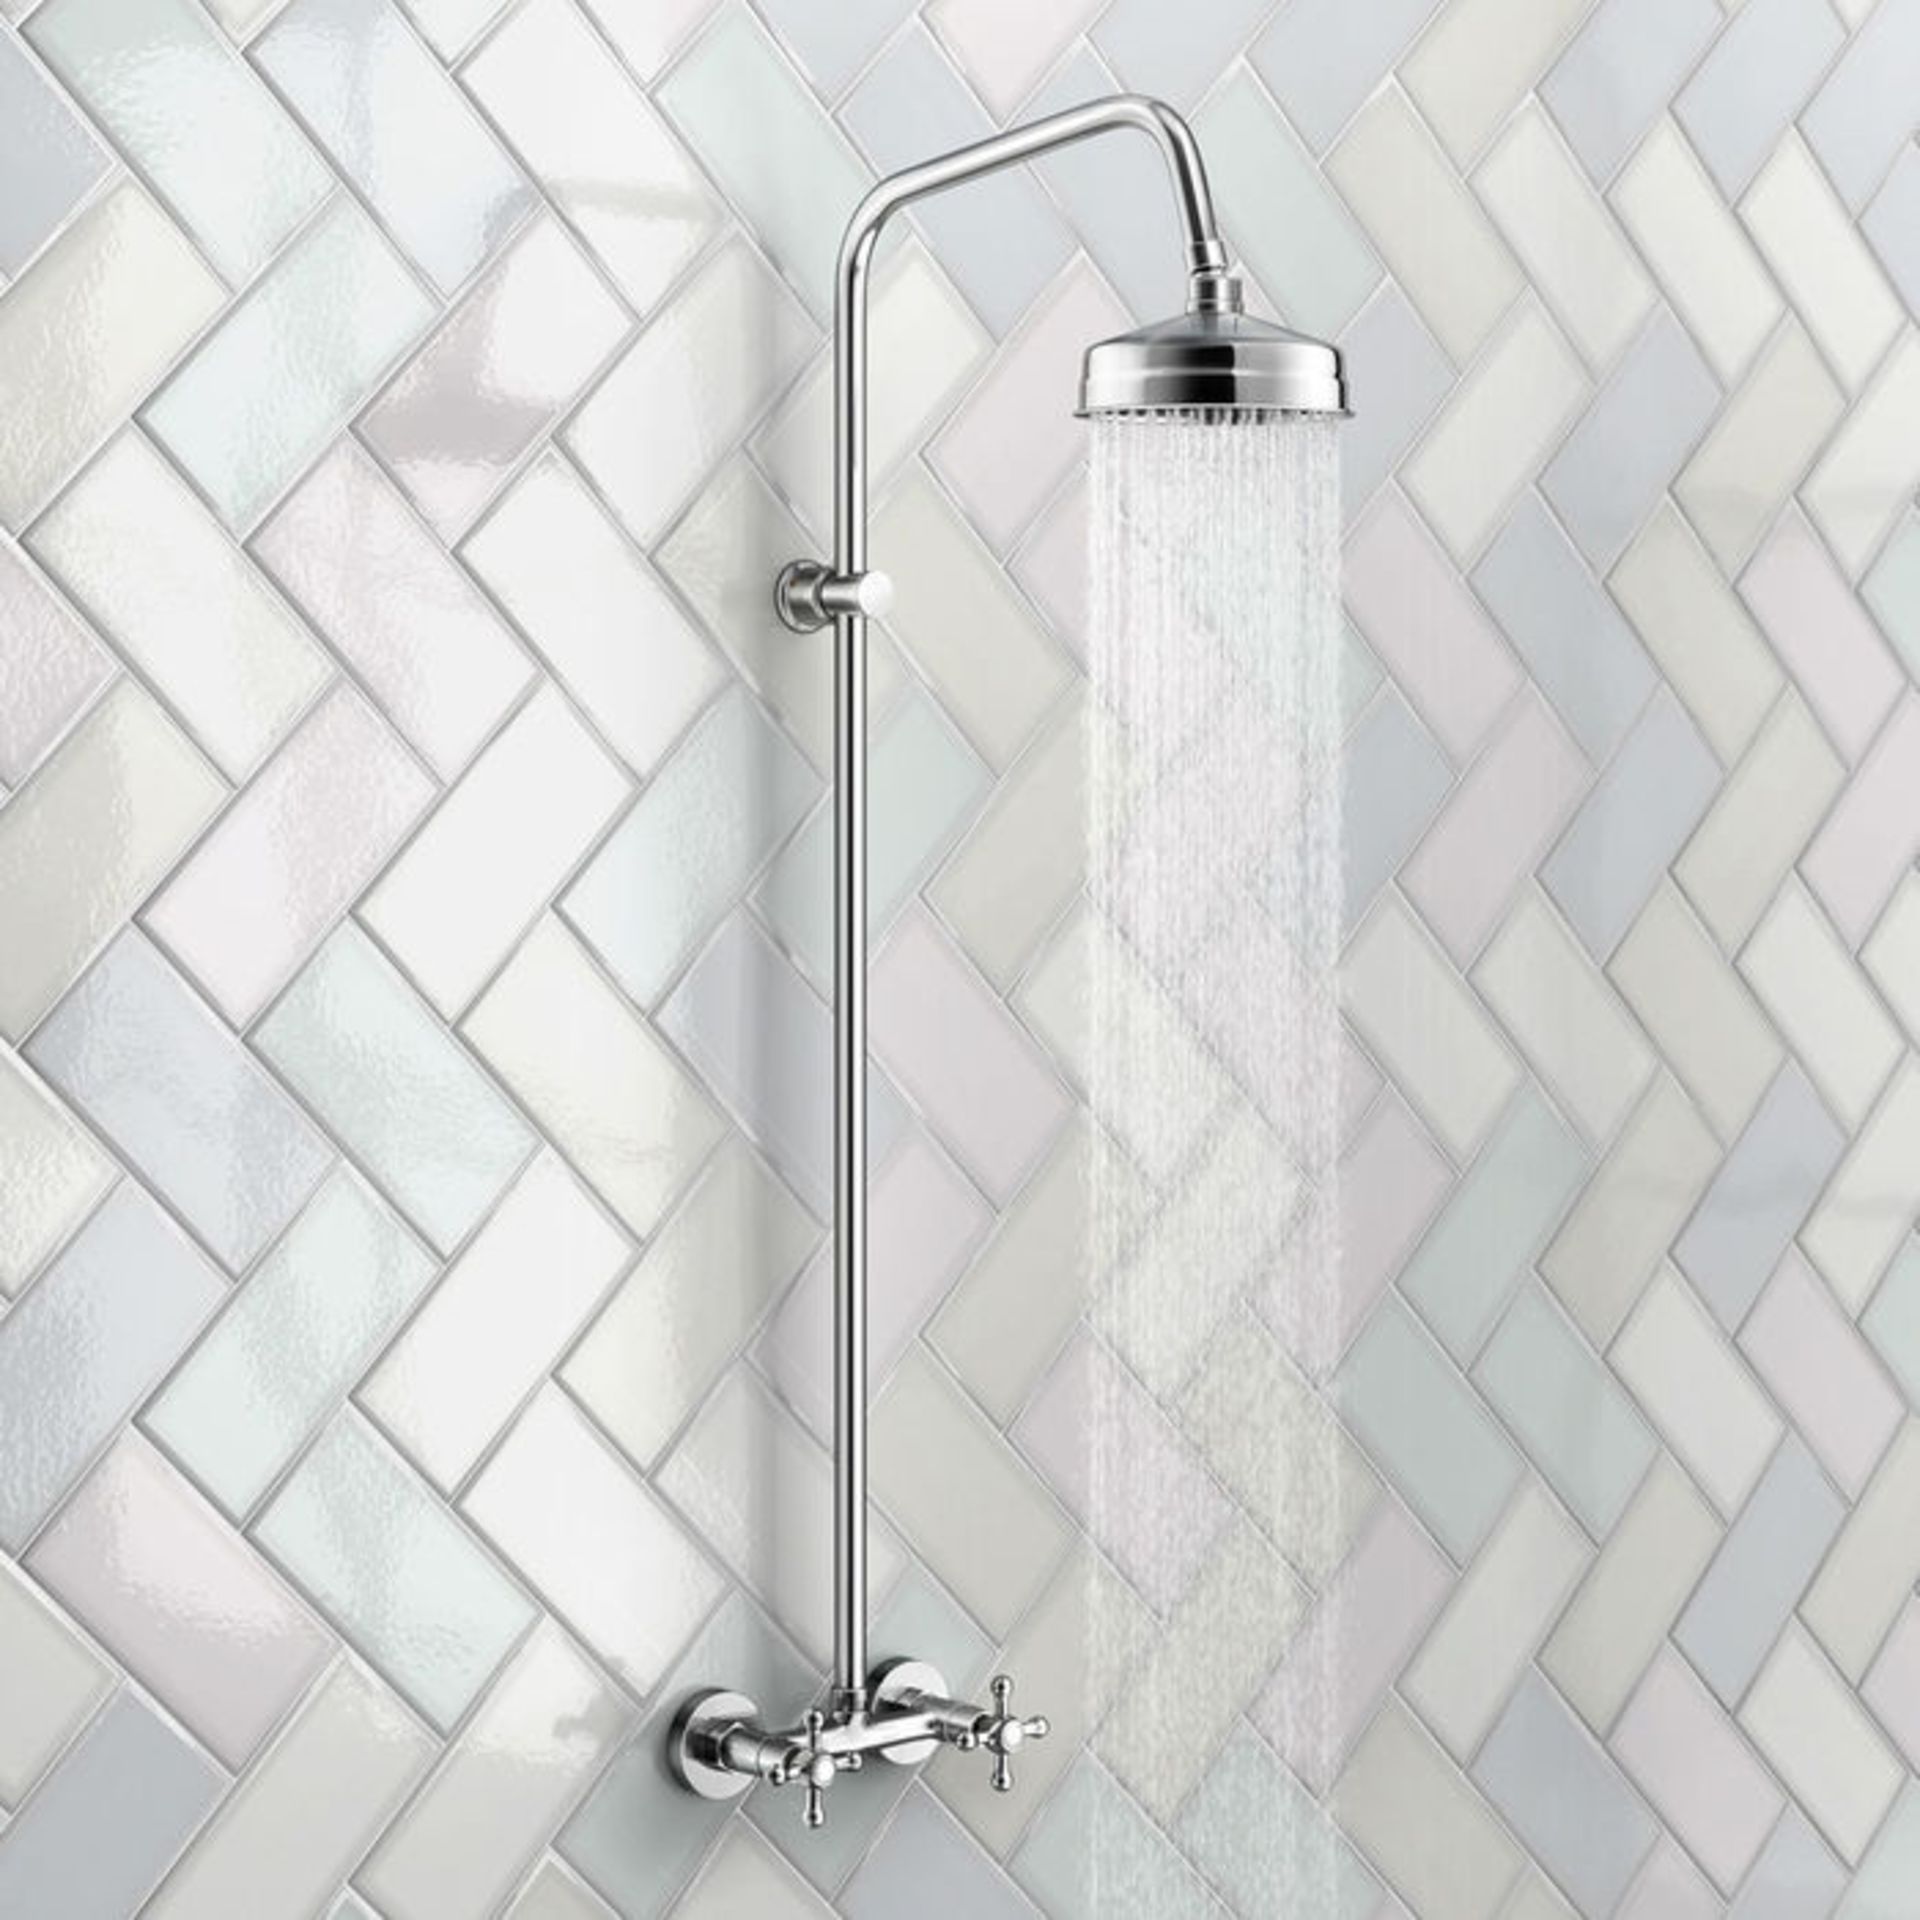 (SM7) Traditional Exposed Shower & Medium Head.Exposed design makes for a statement piece Stunning